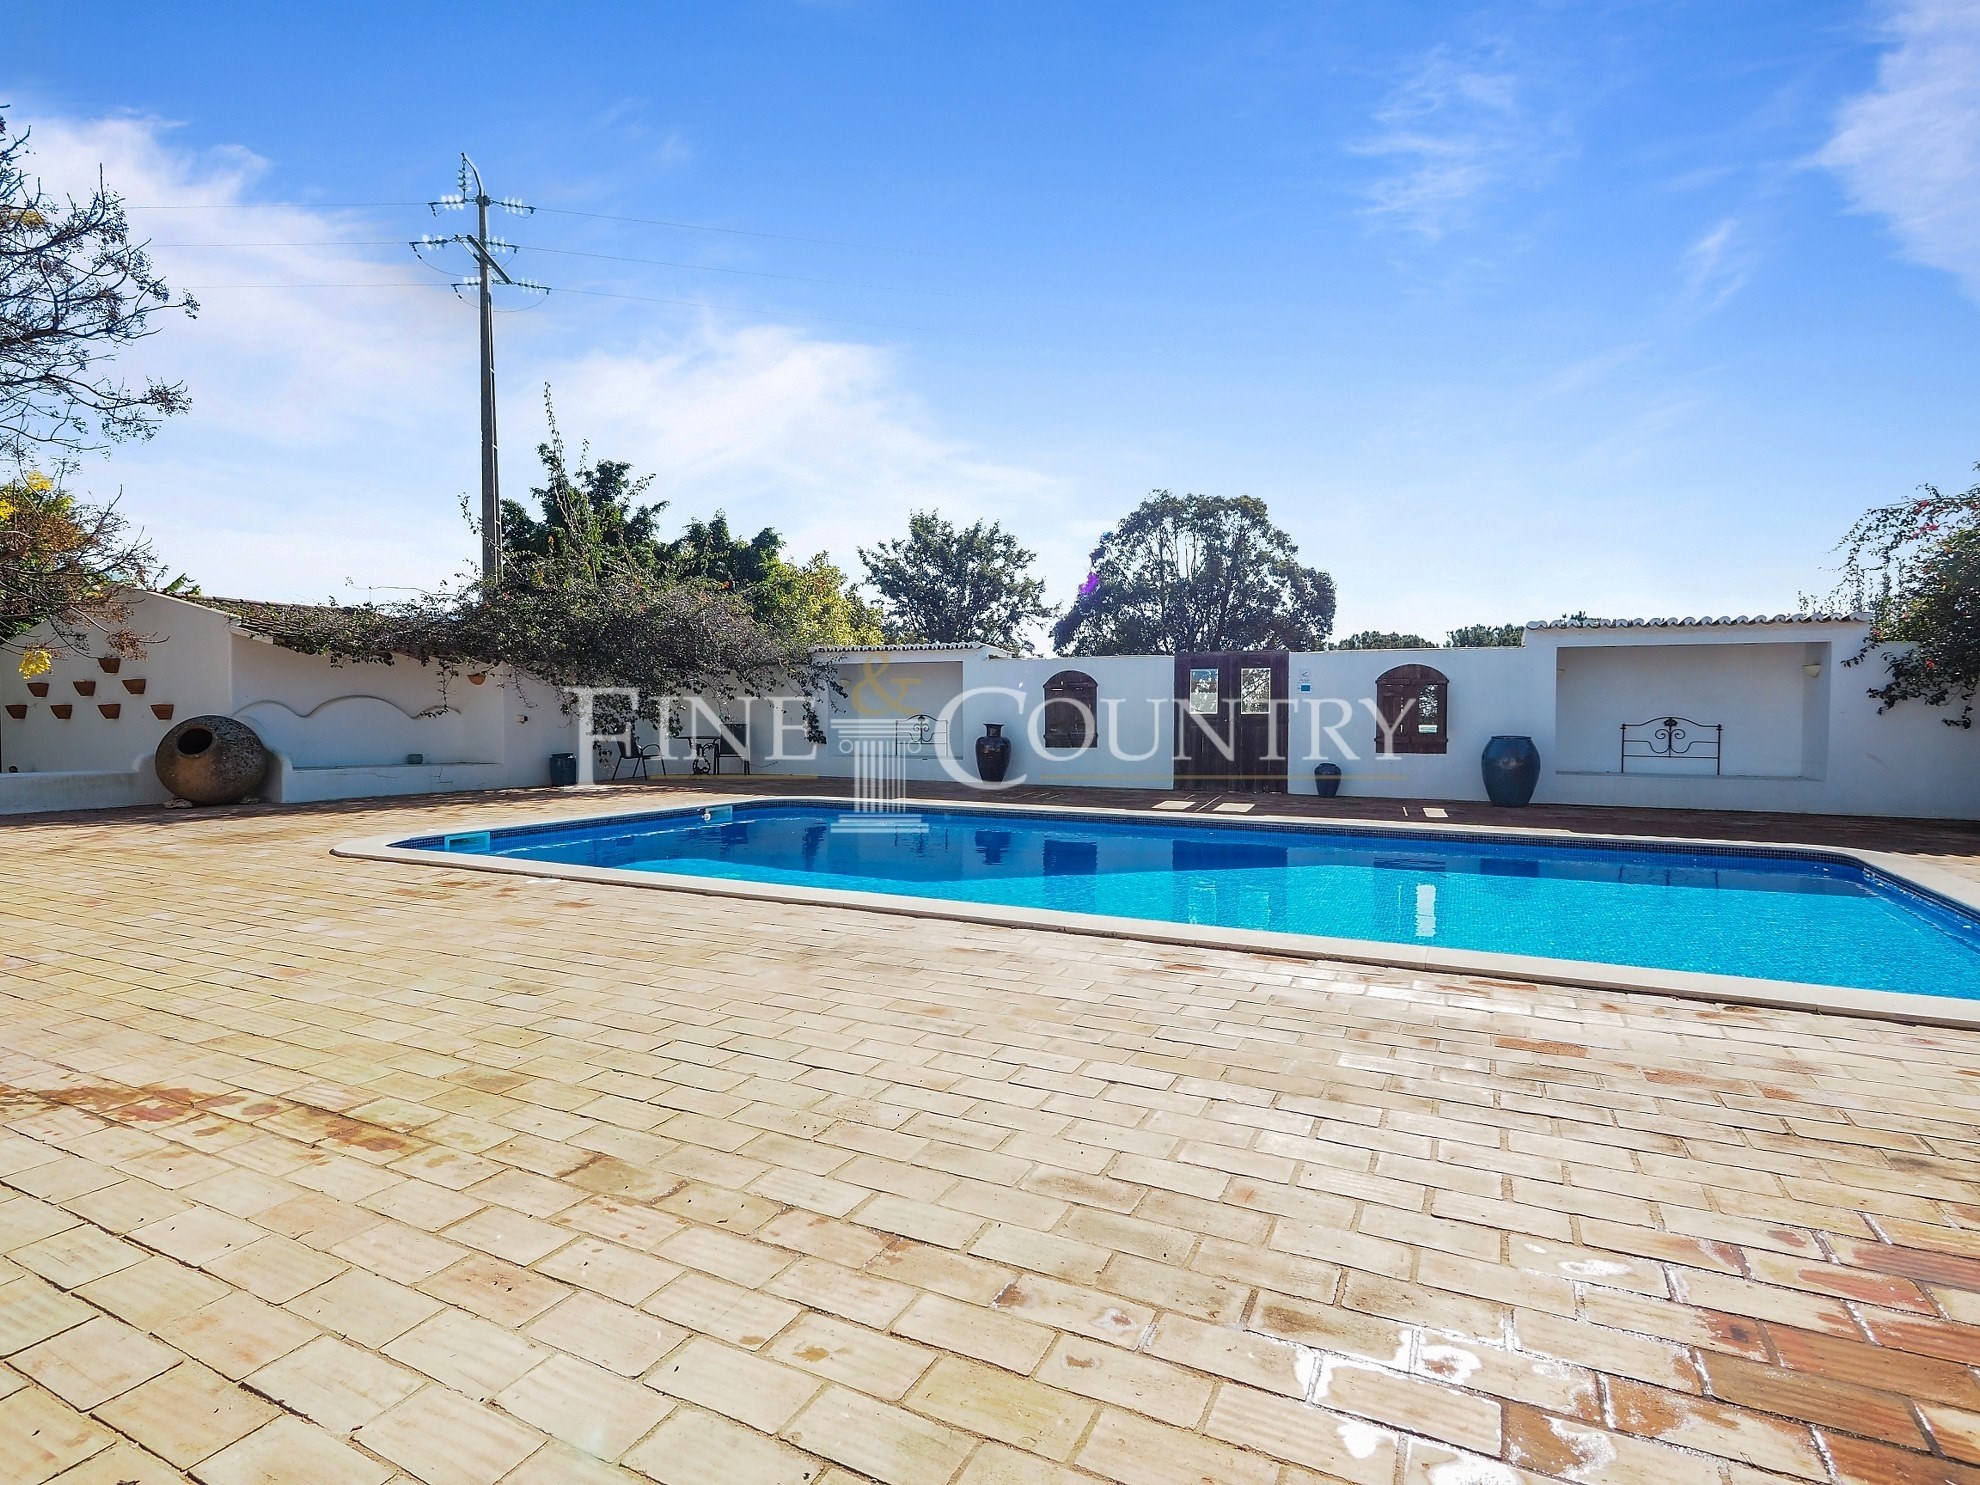 Photo of Silves - 4-bedroom country estate + 2 bedroom annexe